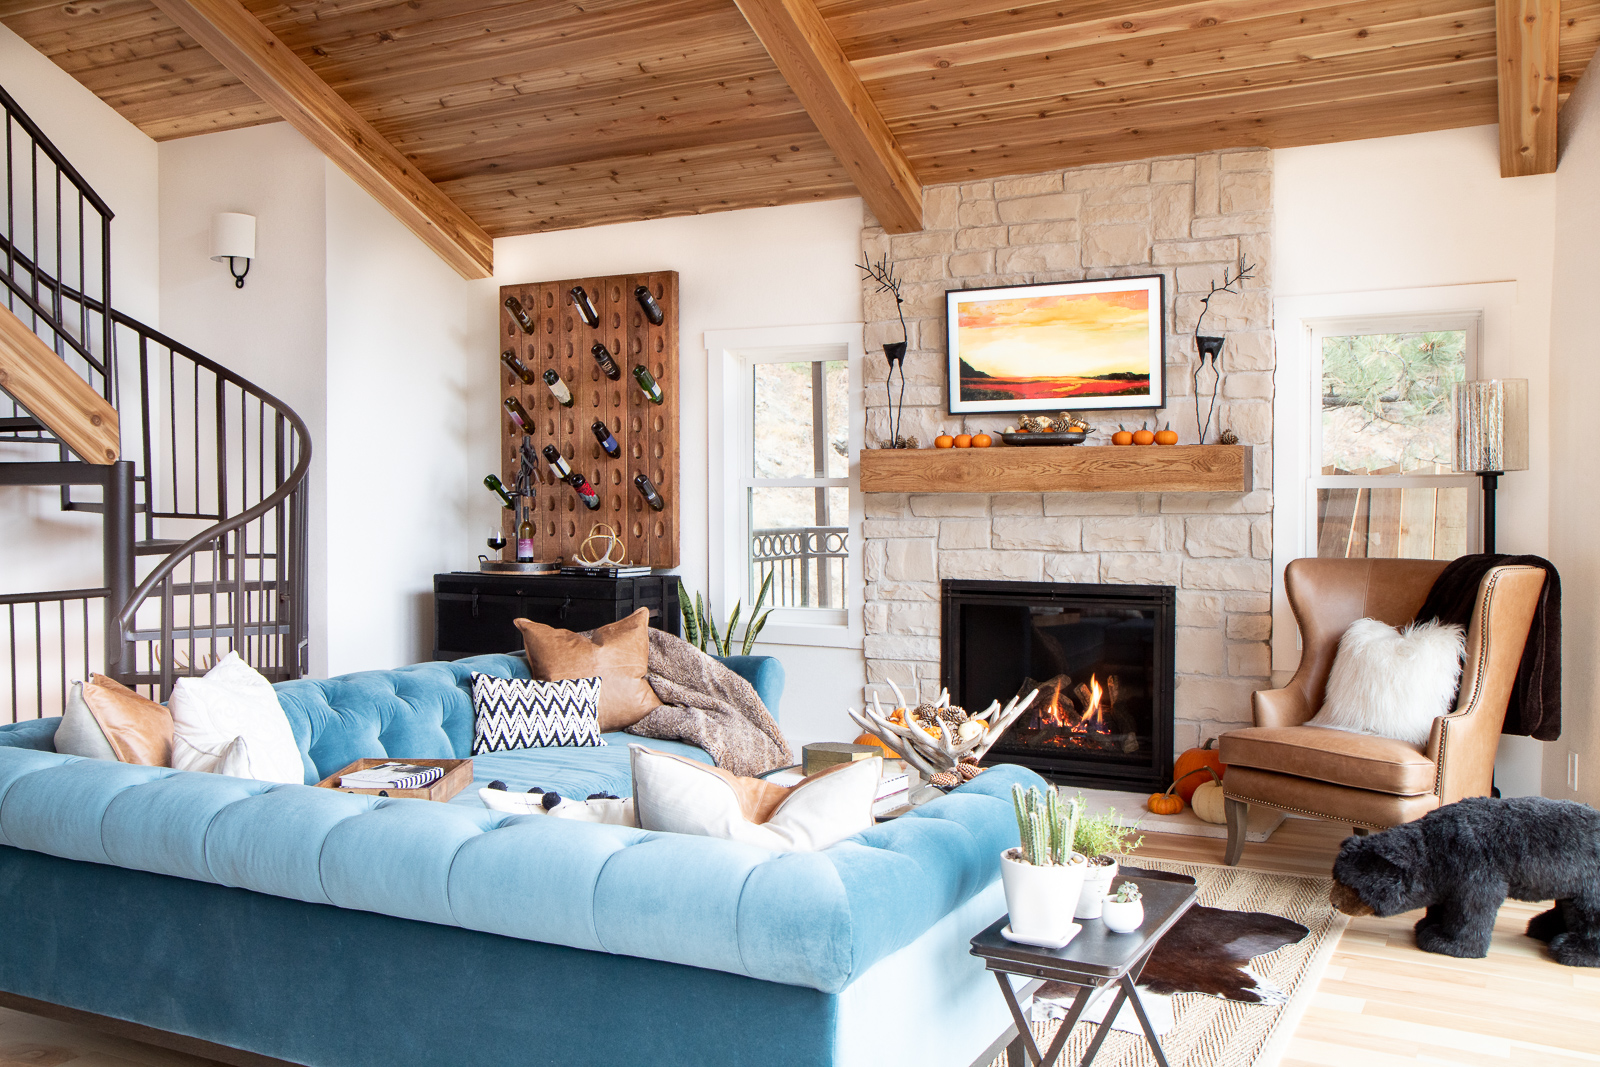 Cabin stone fireplace and cedar ceiling